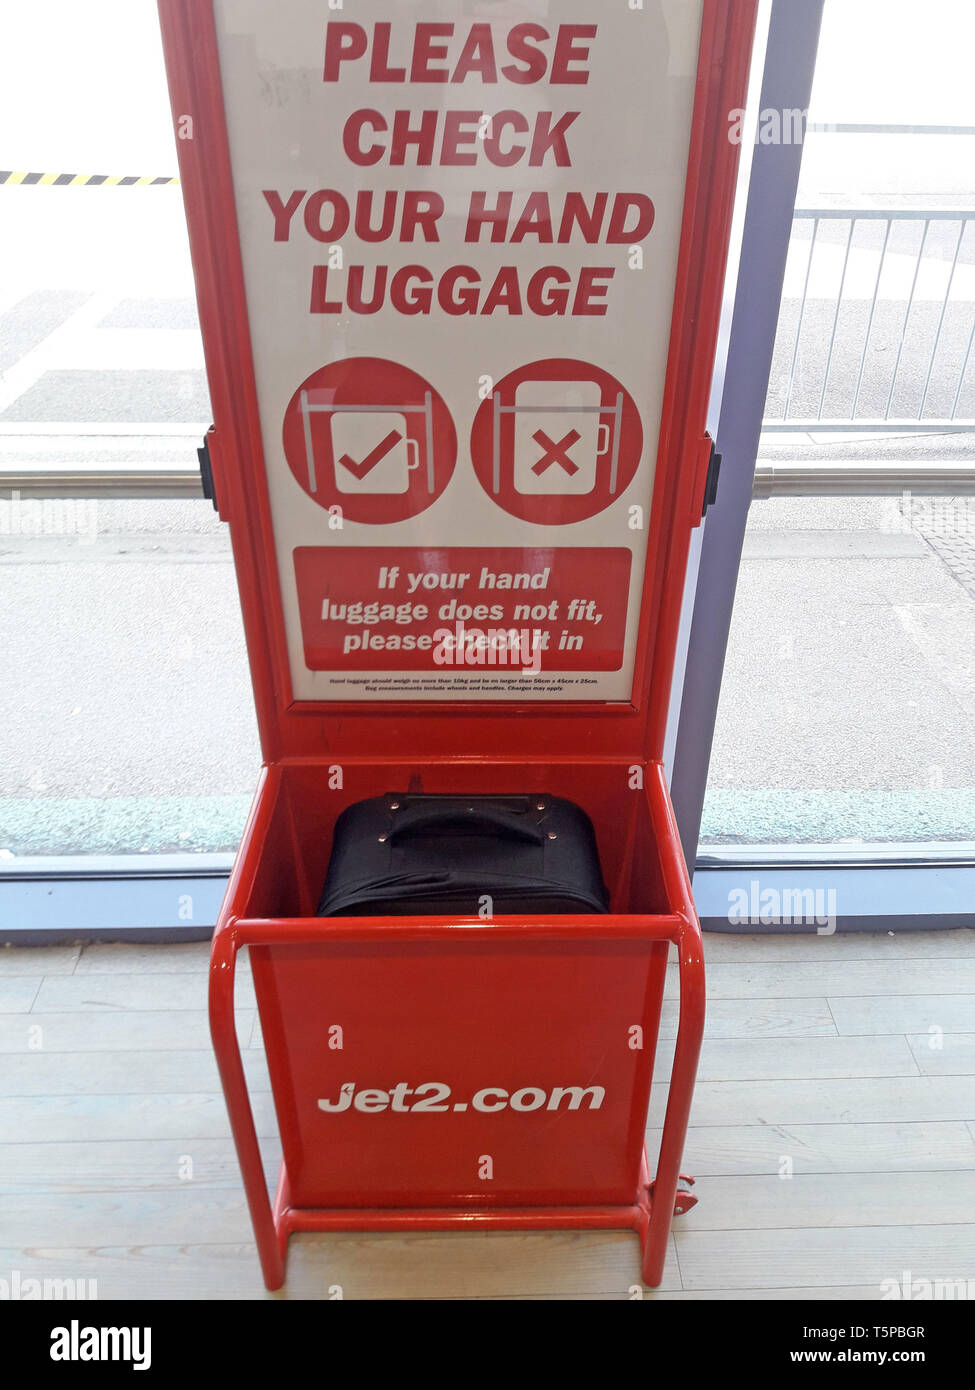 Jet2 Hand Luggage High Resolution Stock Photography and Images - Alamy